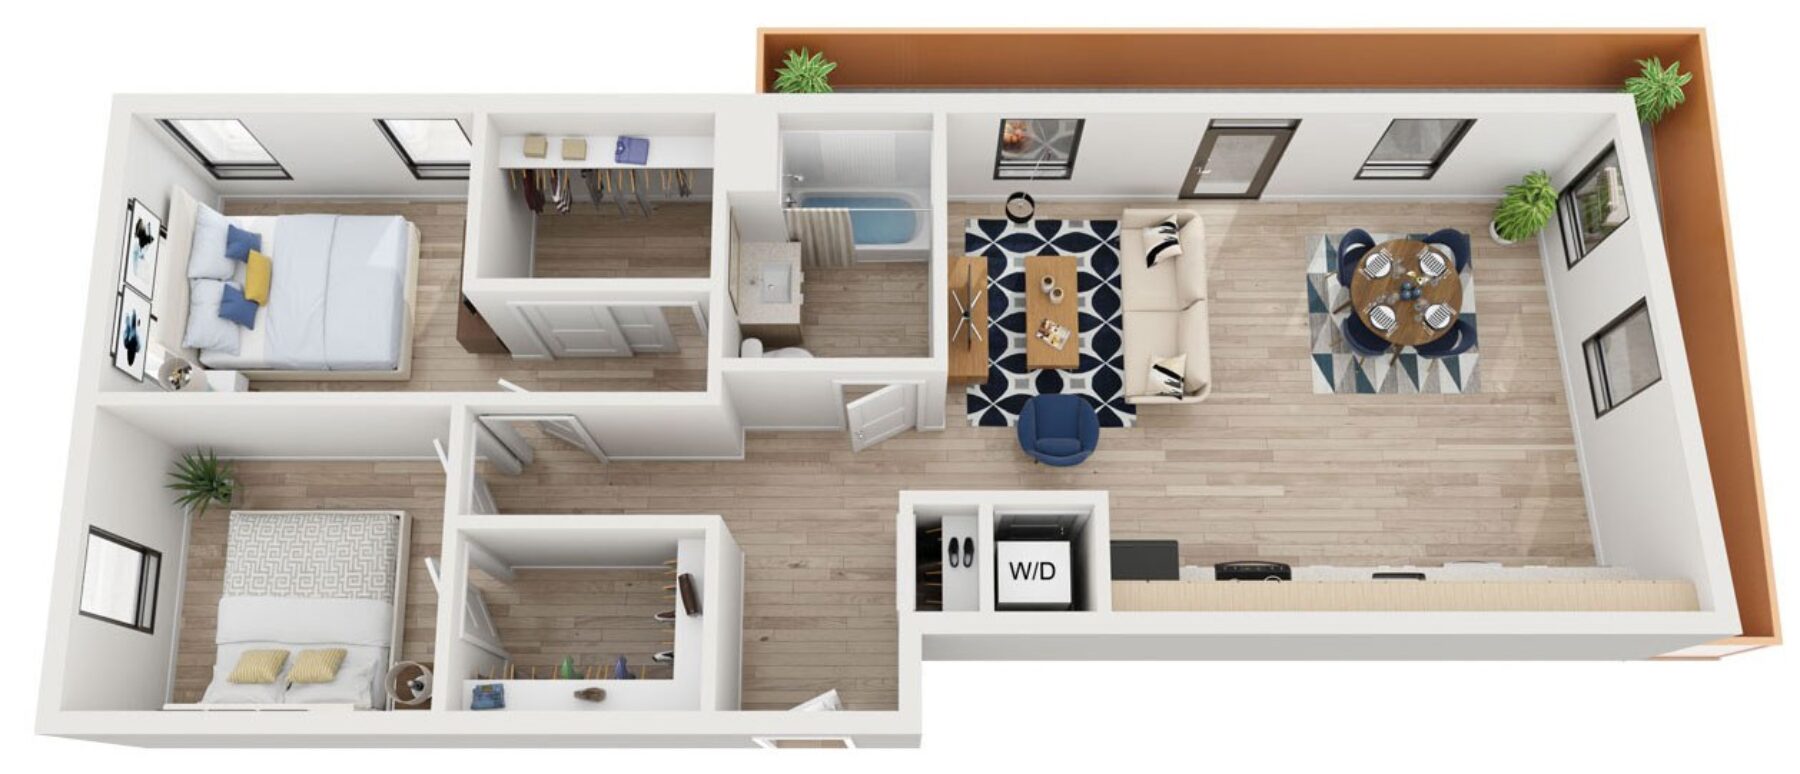 Plan Image: C5 - Two Bedroom